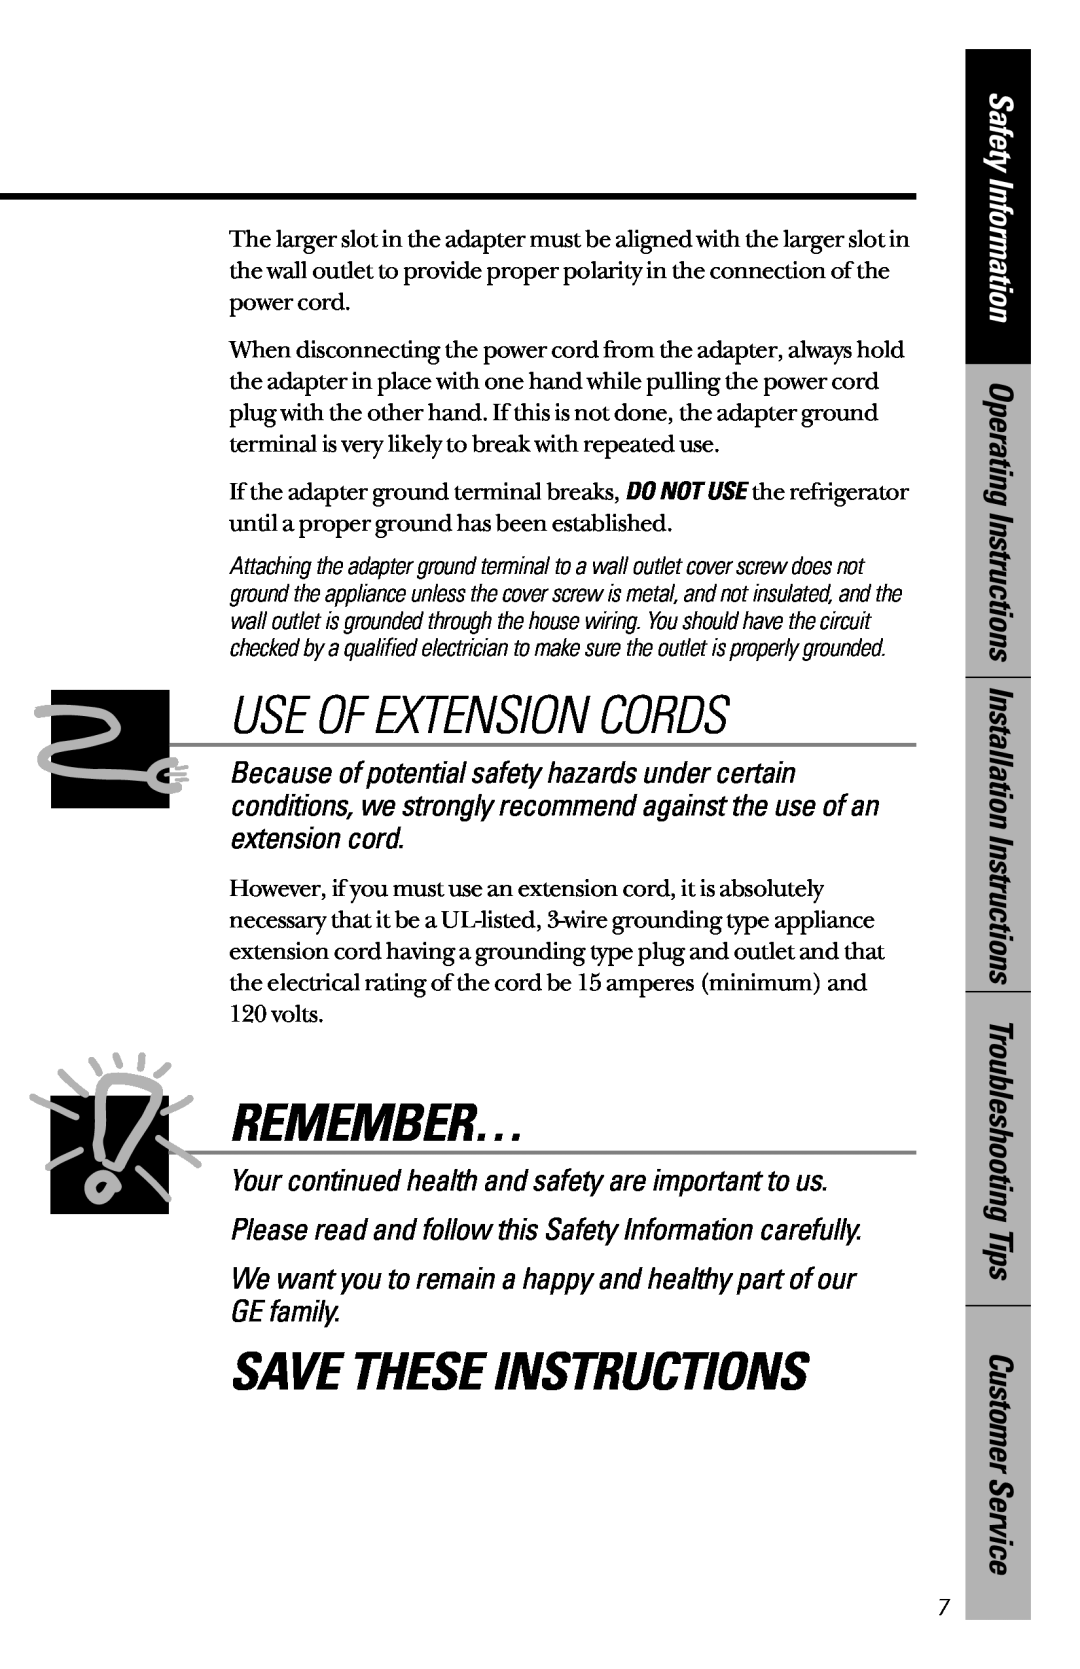 GE 28, 30 owner manual Use Of Extension Cords, Remember…, Save These Instructions 